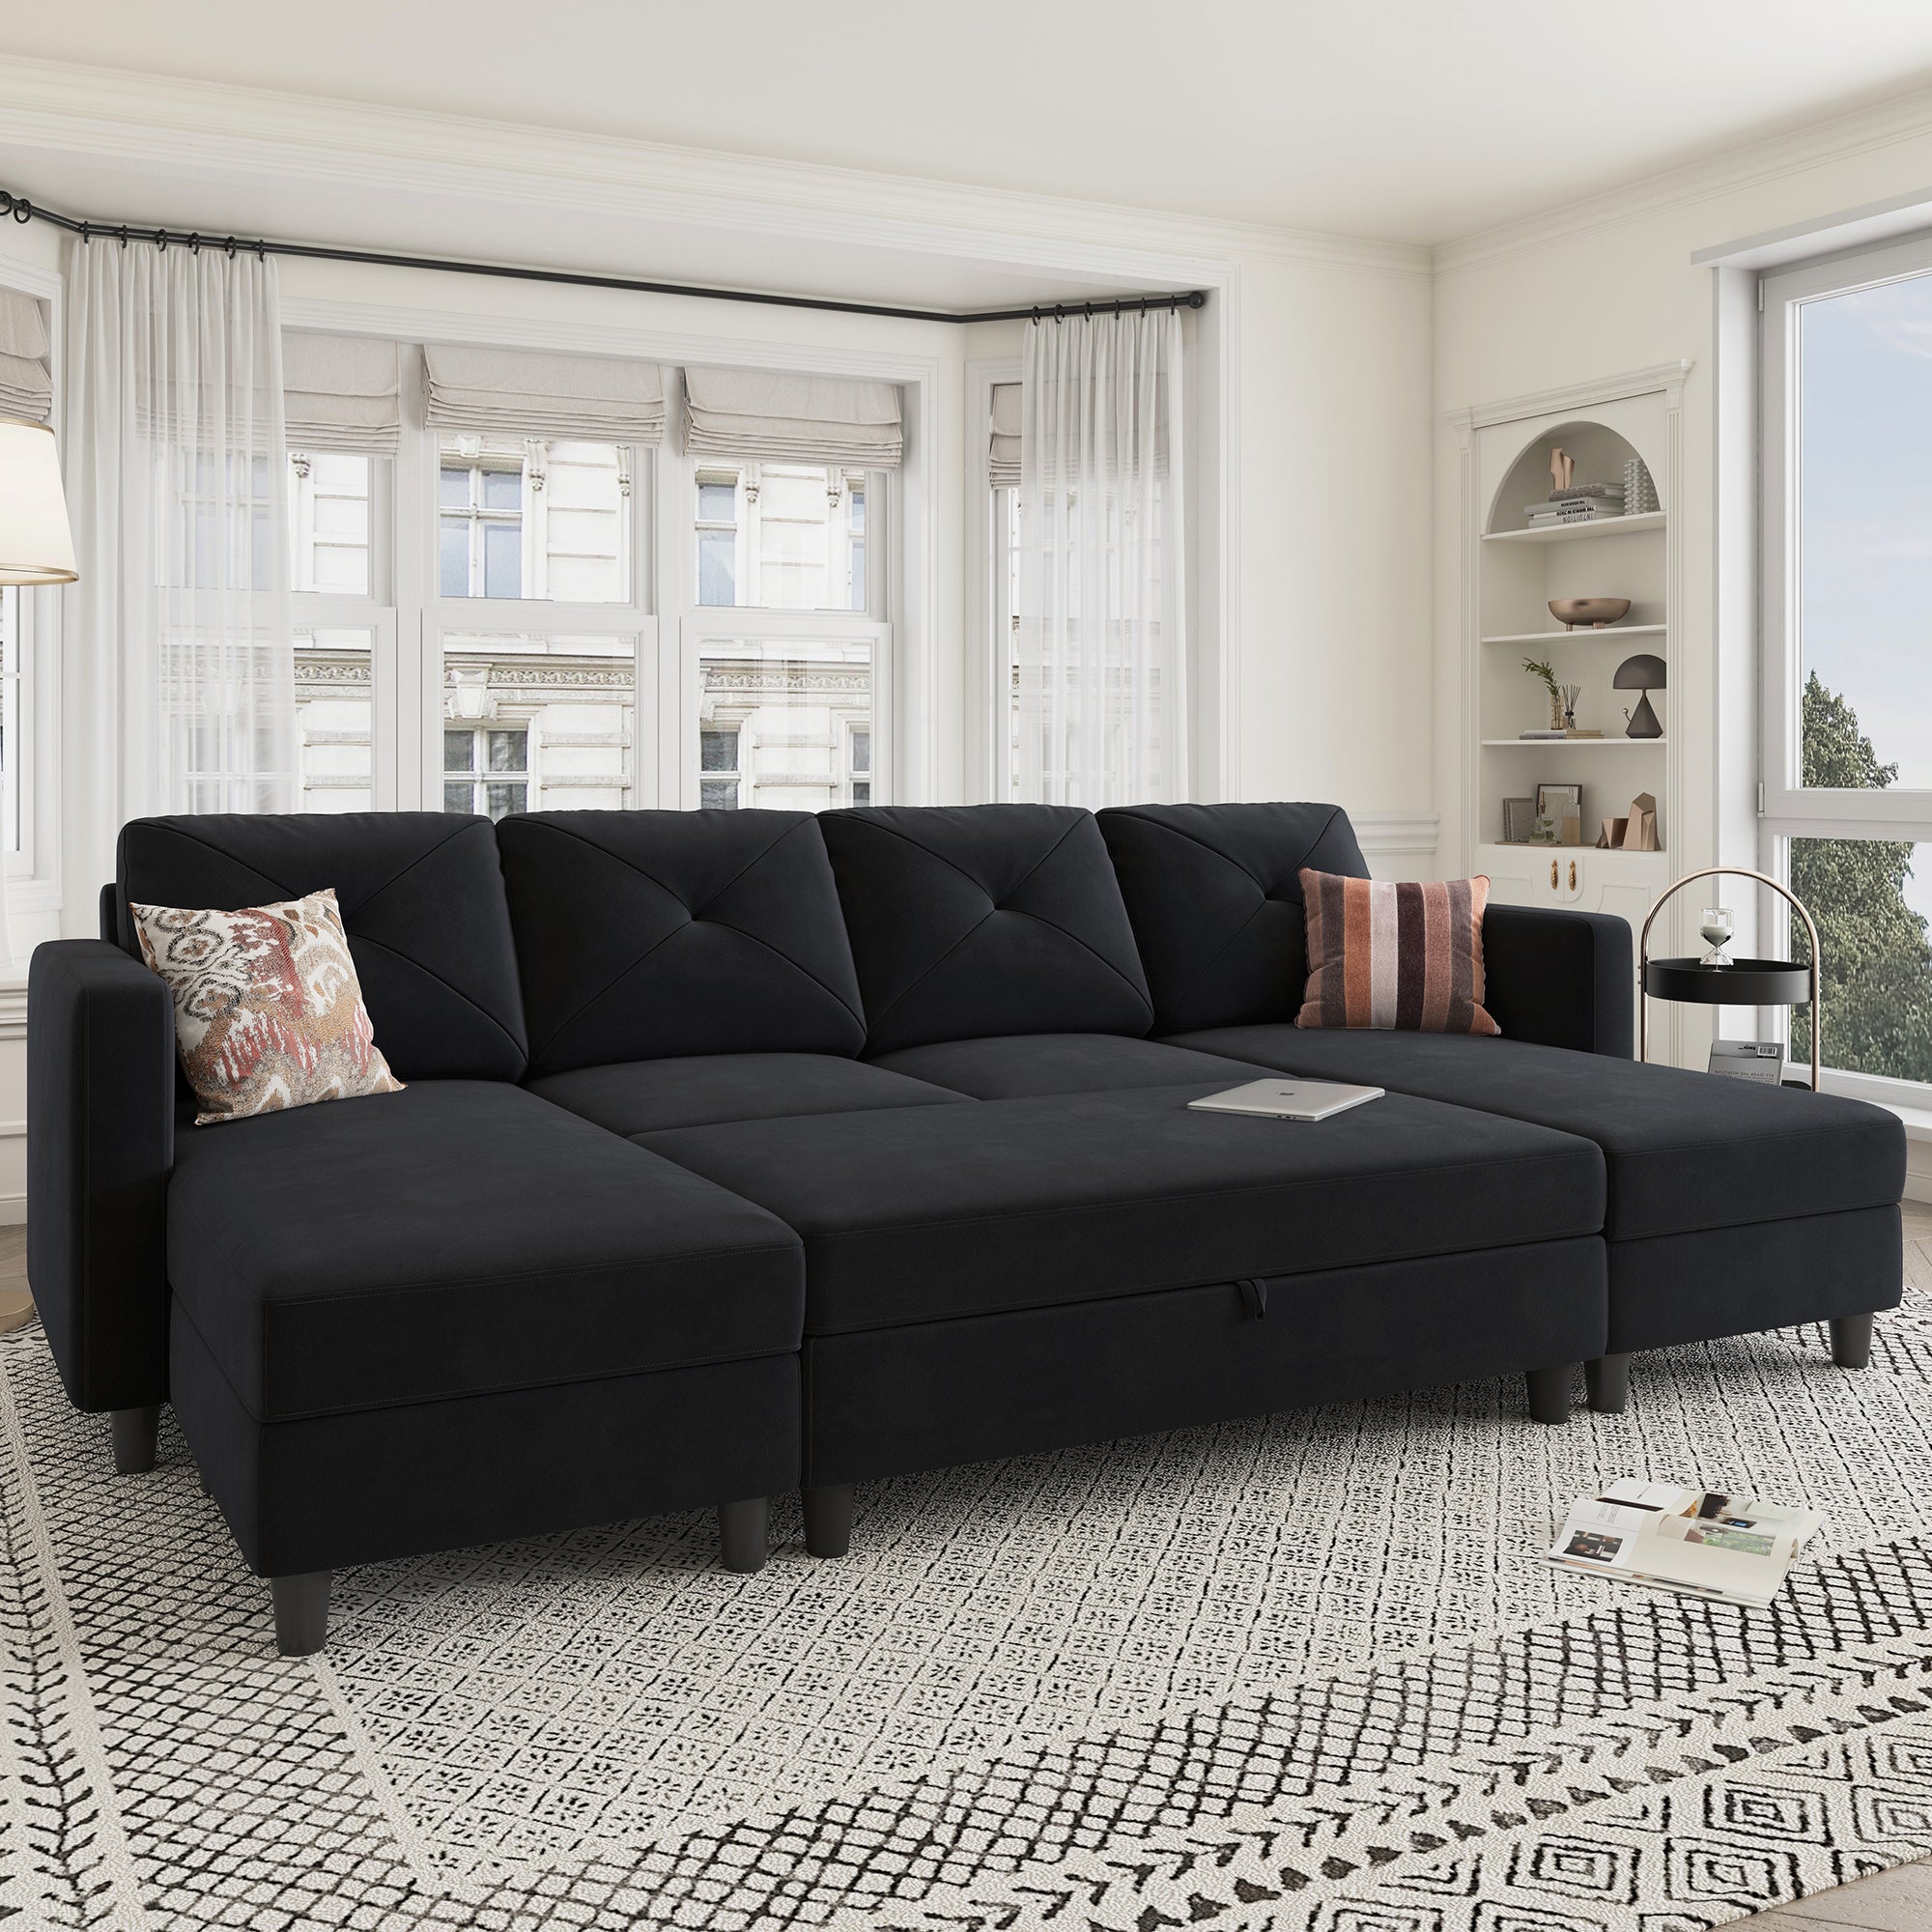 HONBAY 6-Piece Velvet Convertible Sleeper Sectional With Storage Ottoman